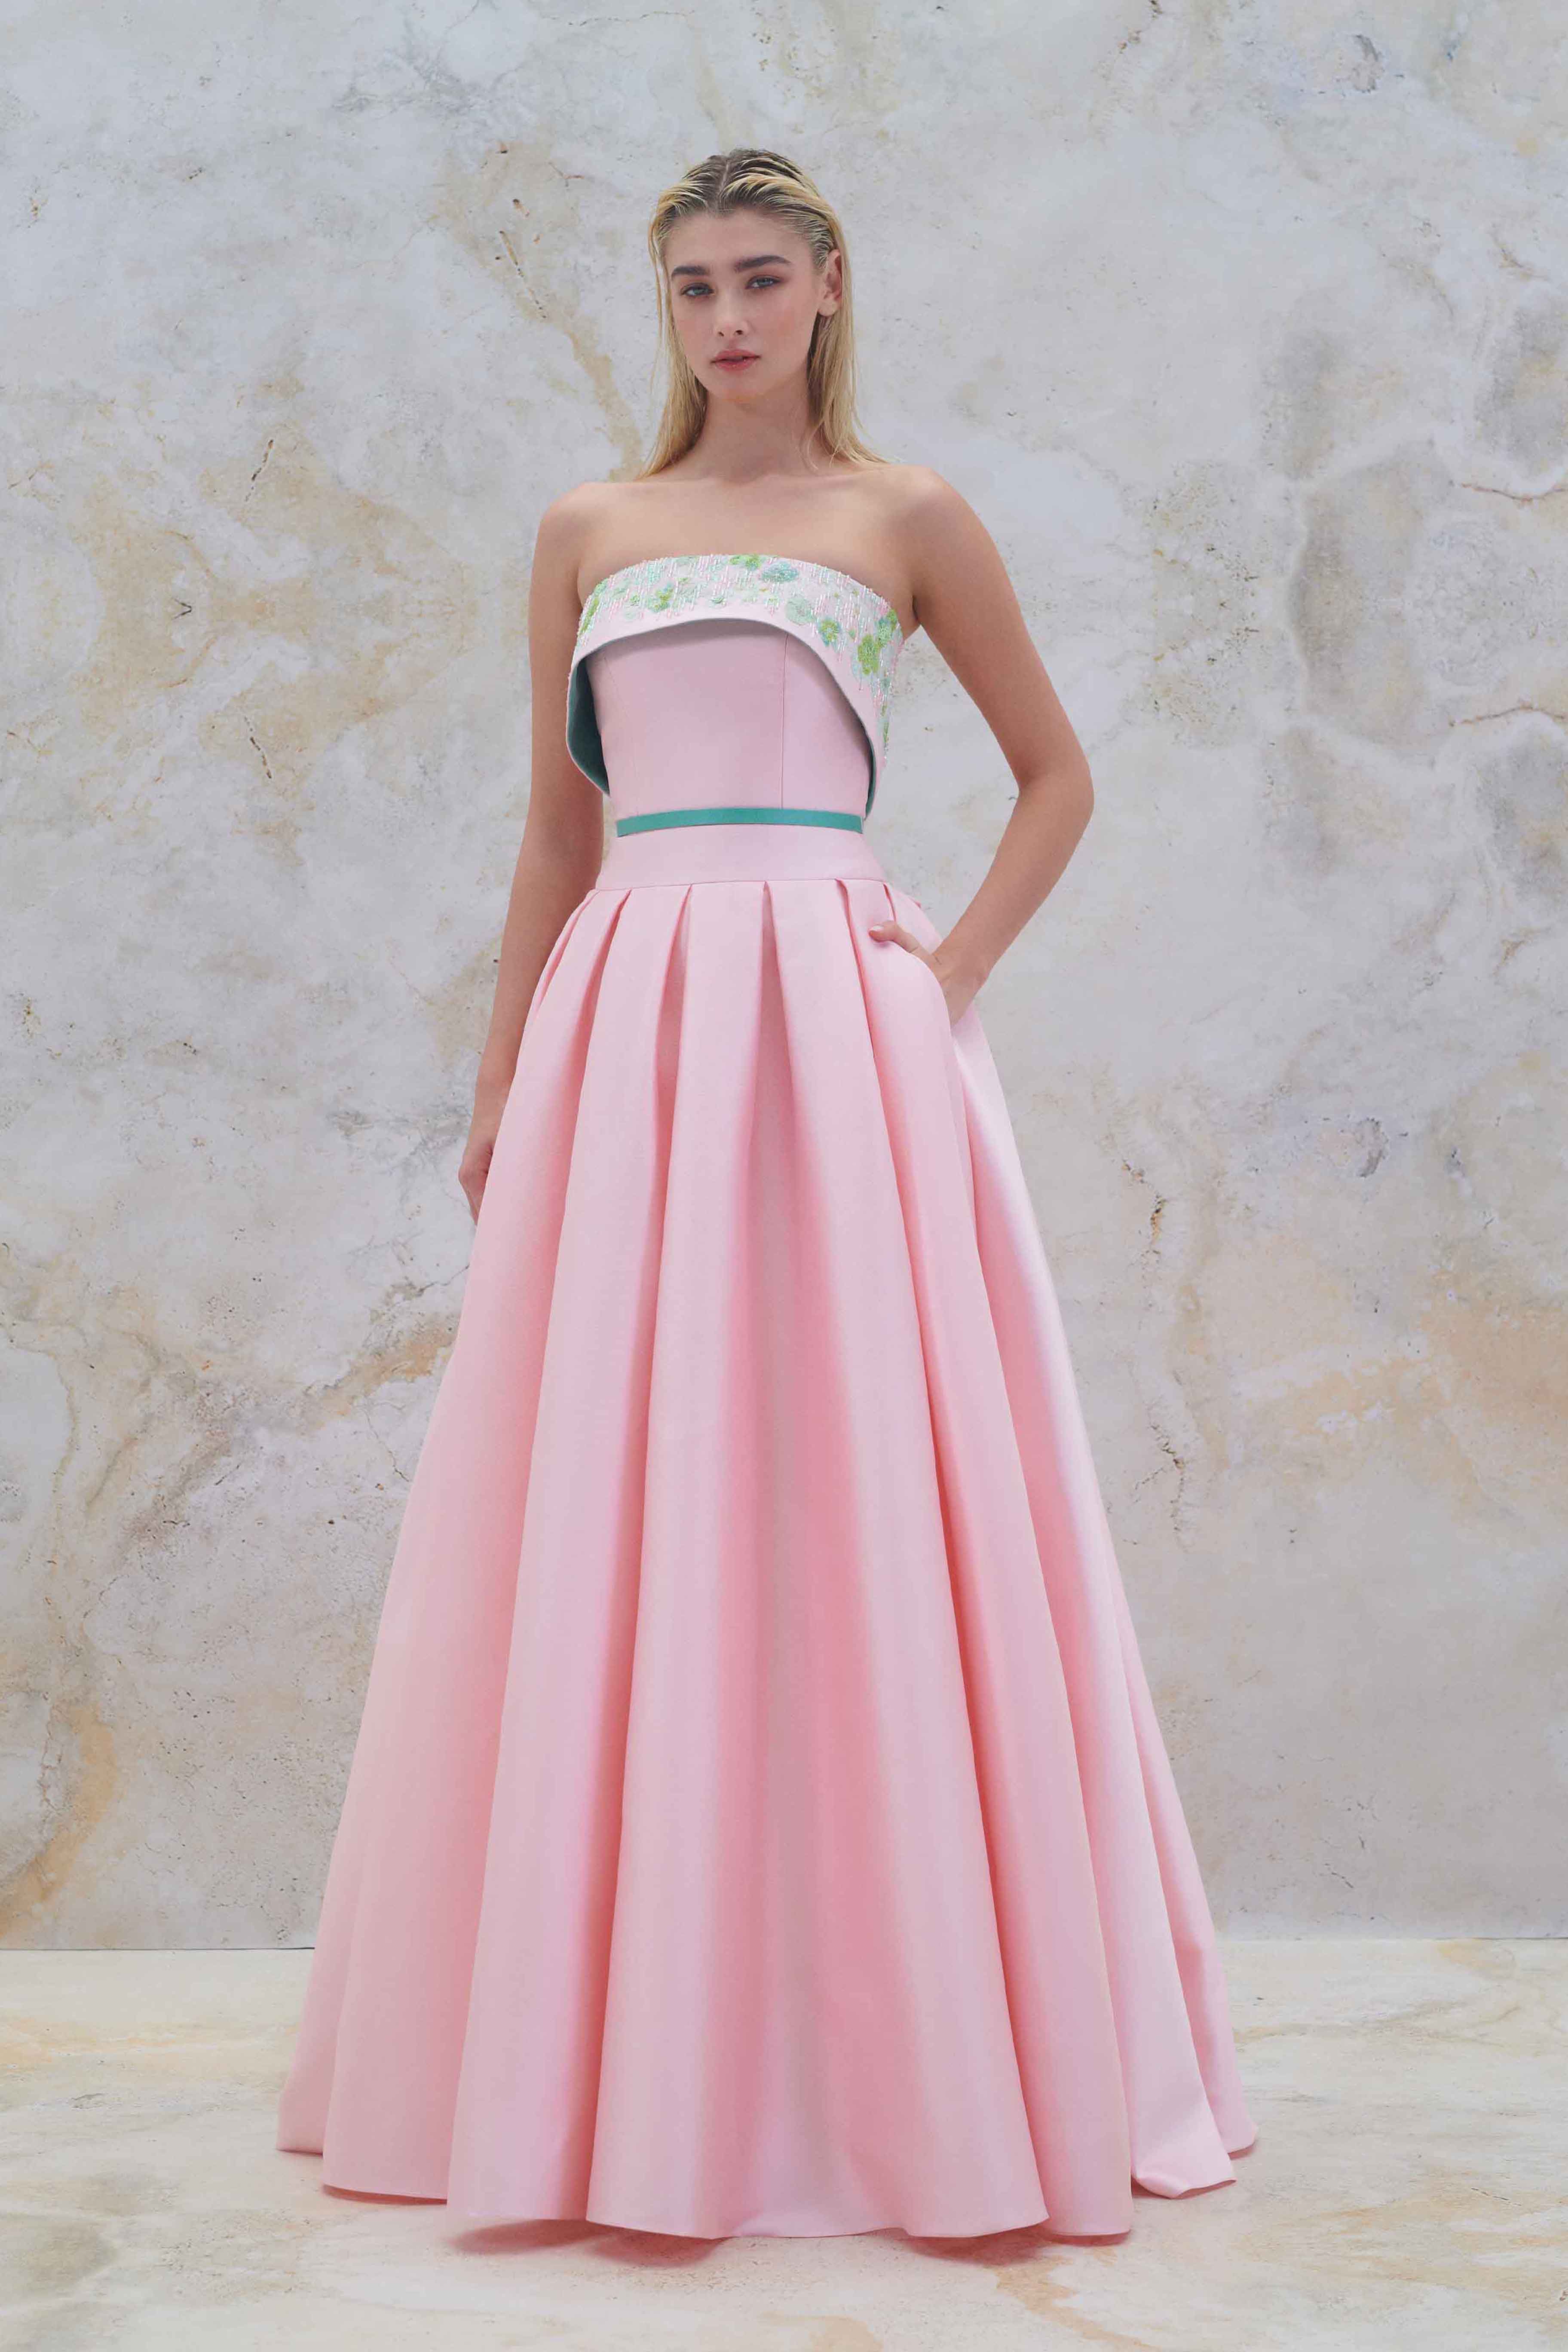 Princess ball gown with strapless beaded décolletage